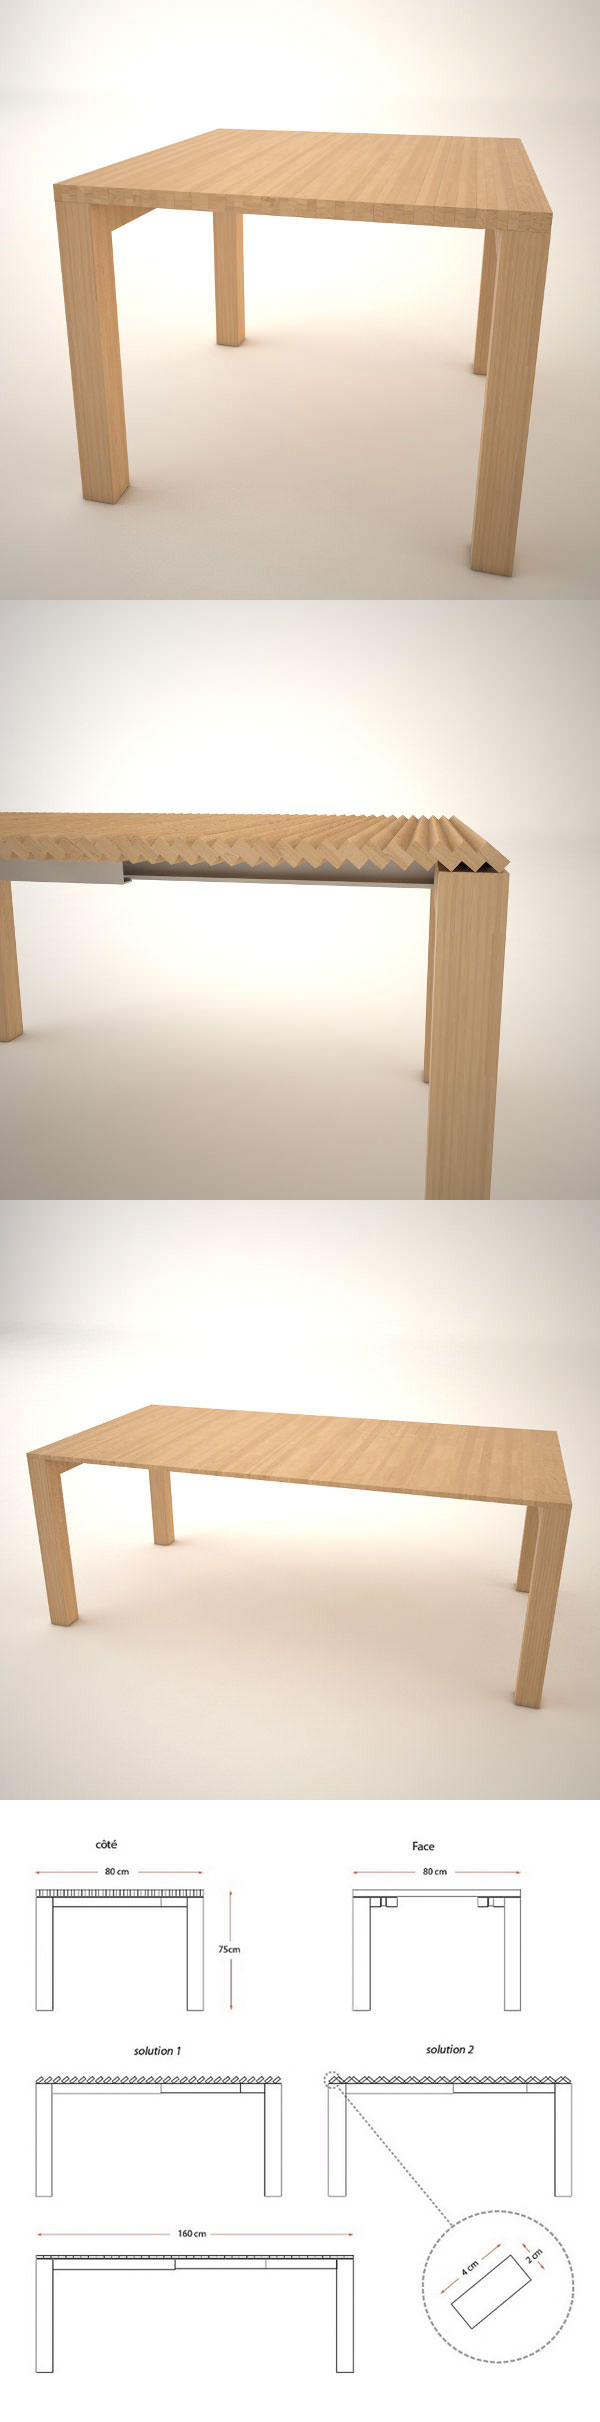 4-Expandable-dining-table